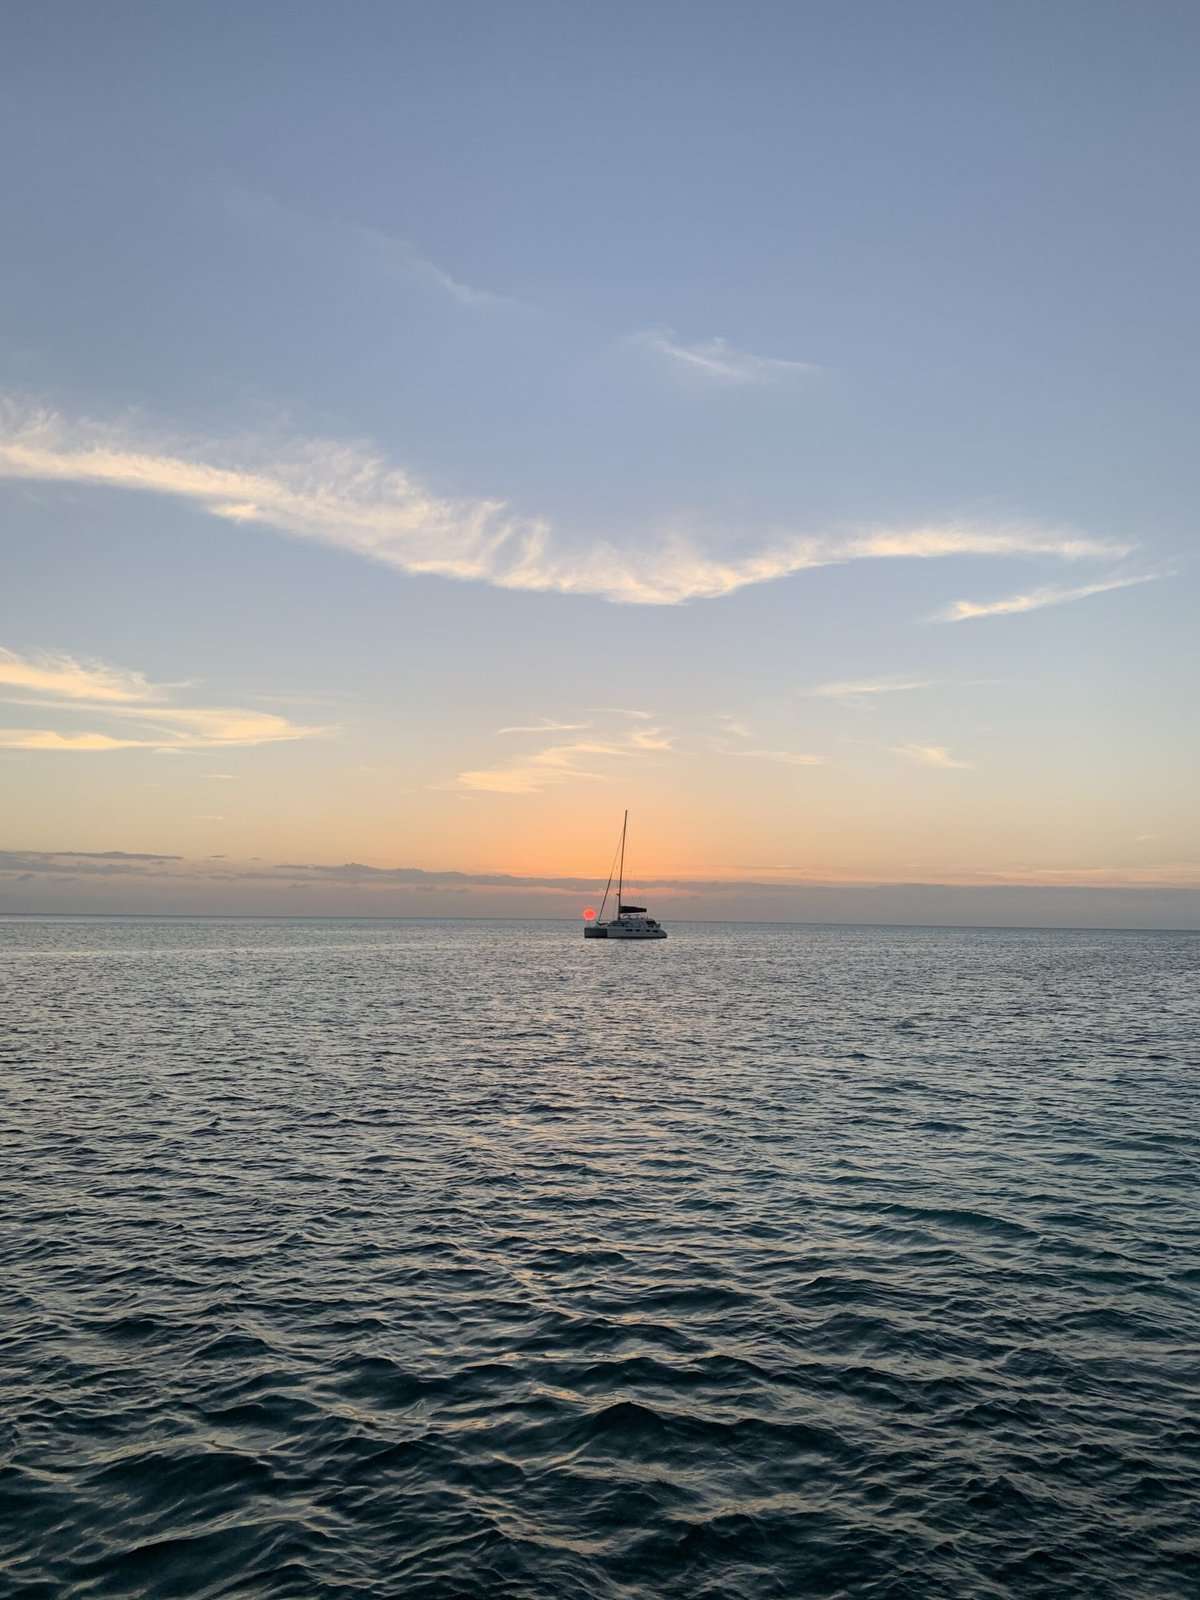 A single boat in an anchorage at sunset